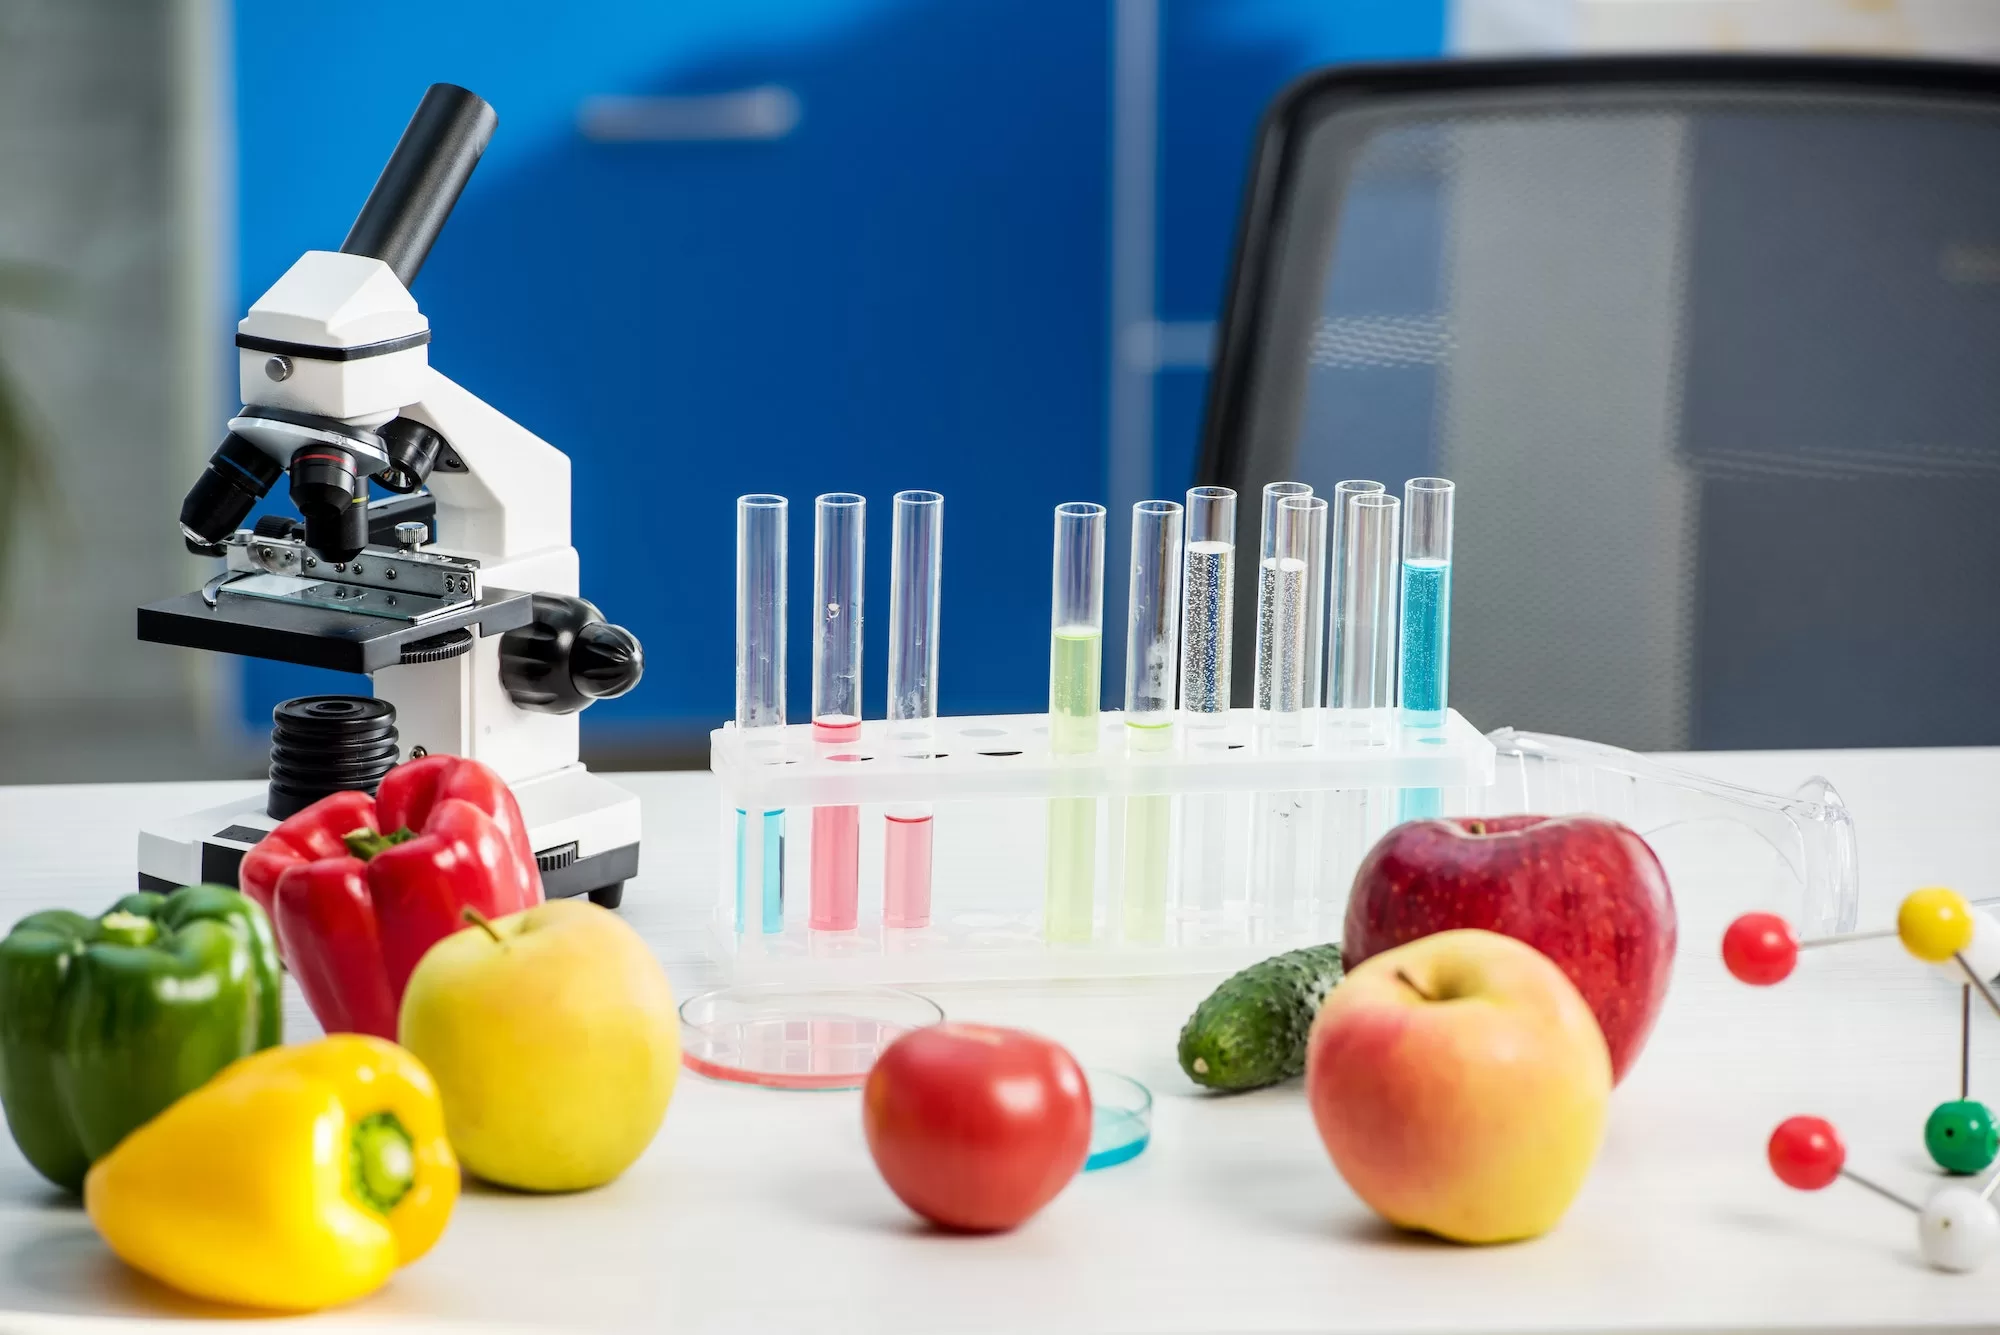 microscope, fruit, vegetables, test tubes on table in lab